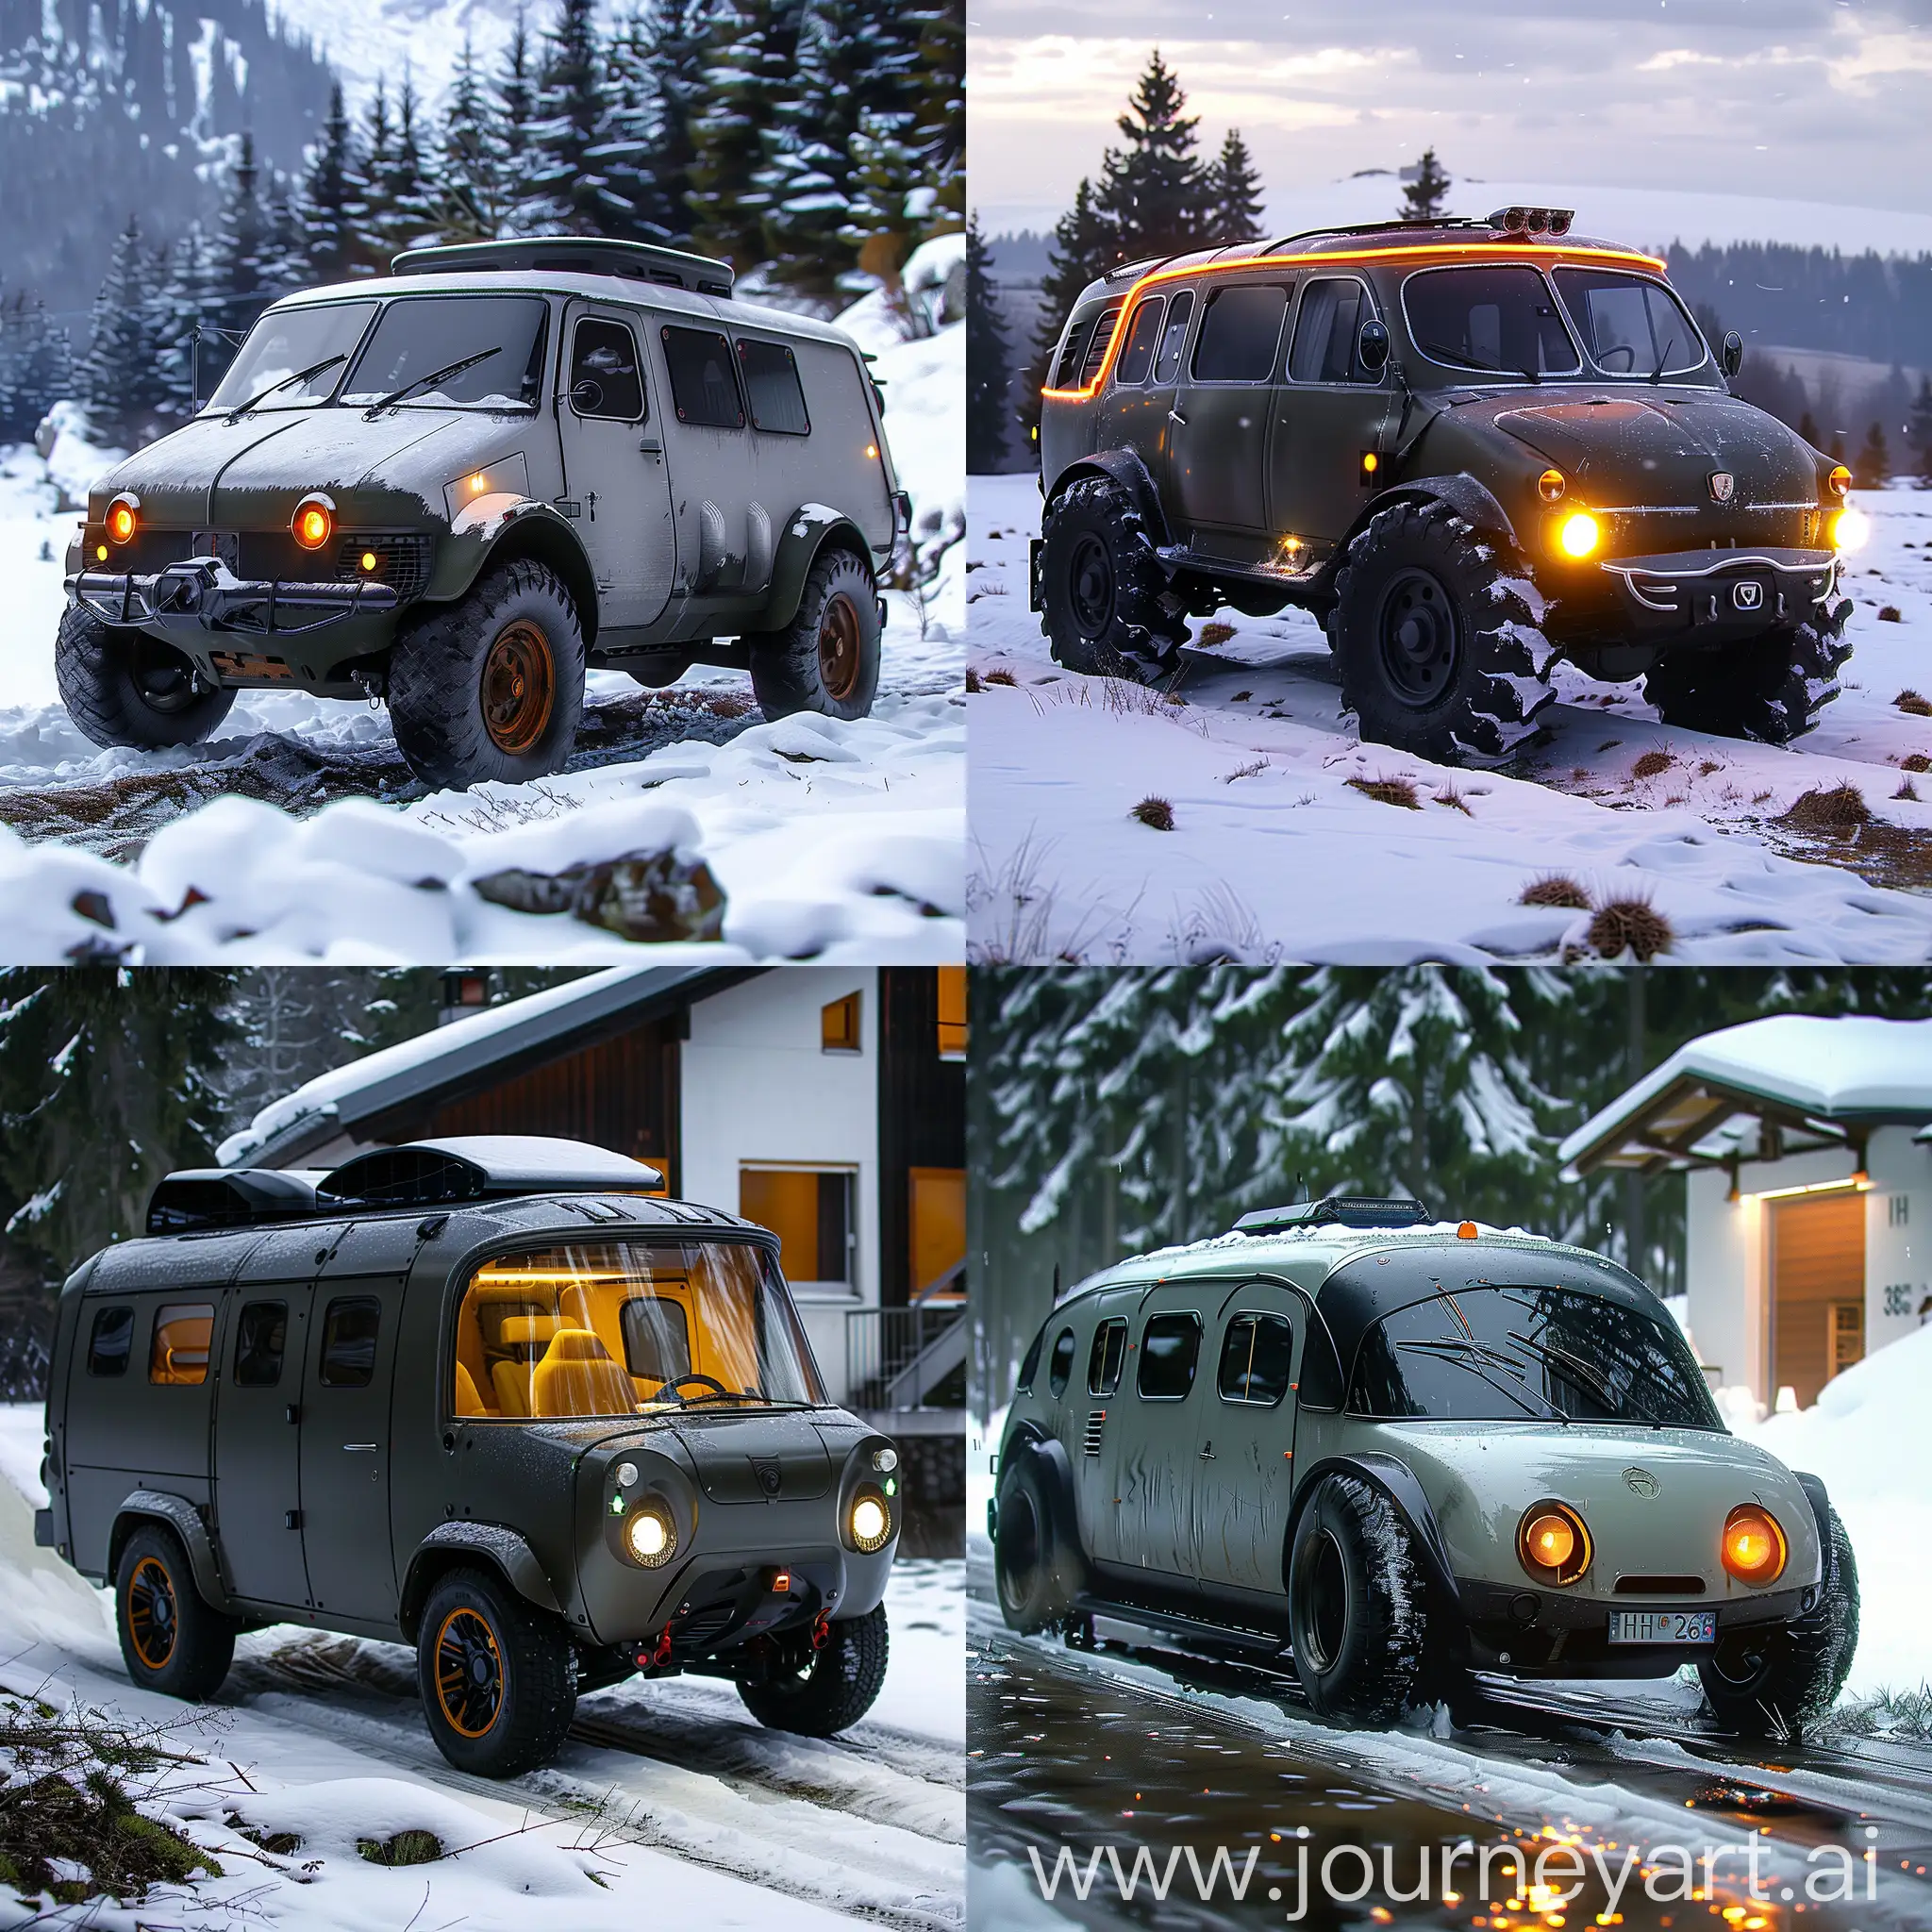 NeoFuturistic-UAZ452-SciFi-SelfDriving-Van-with-LED-Lighting-and-Solar-Panels